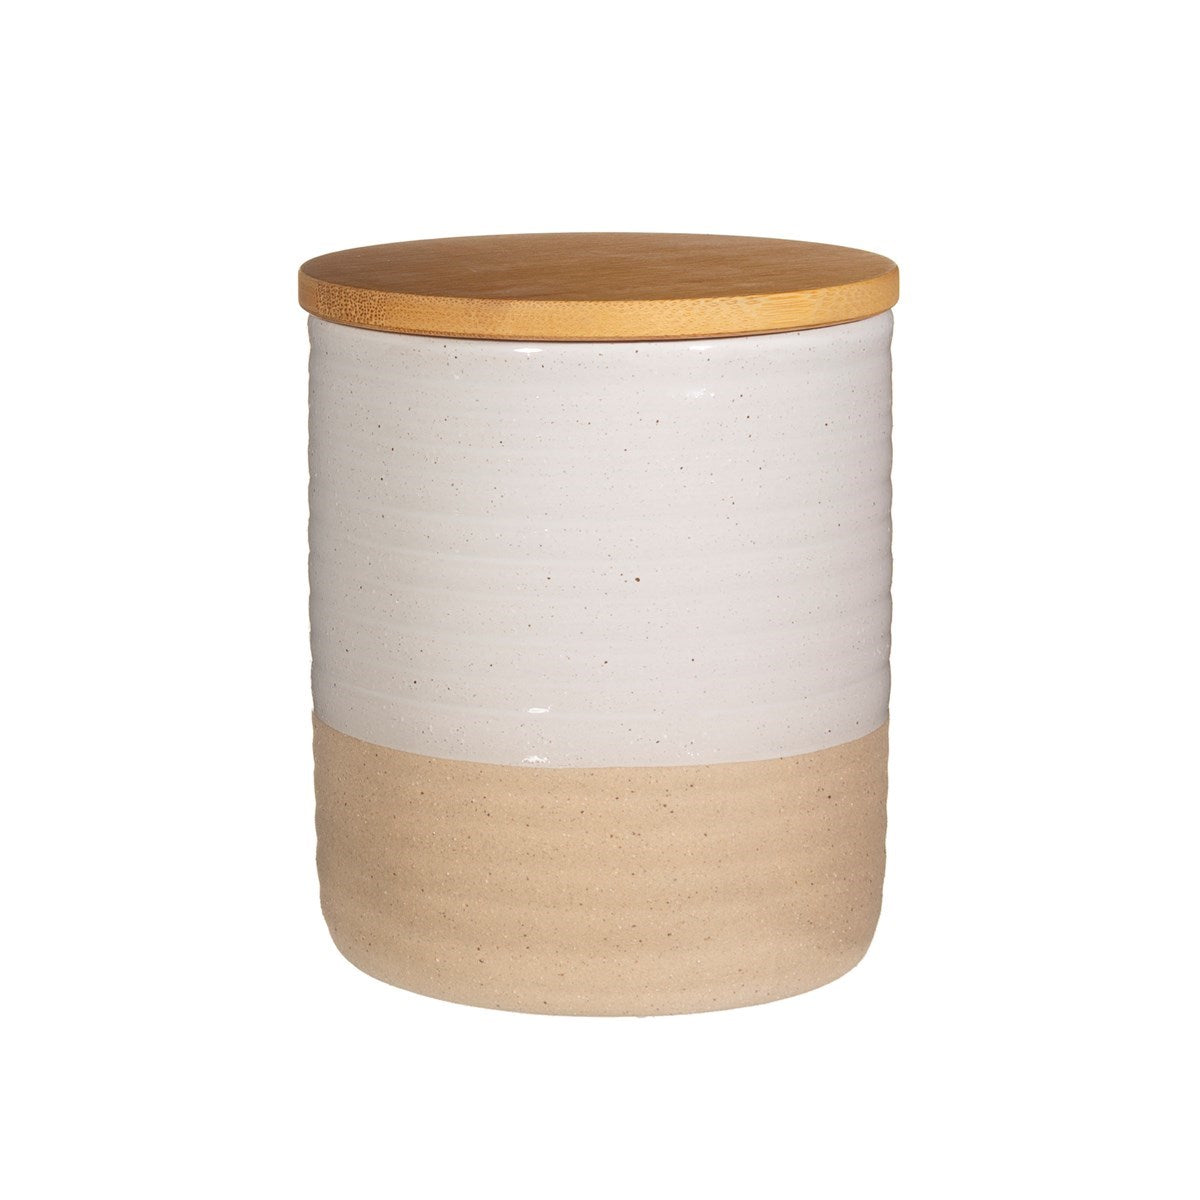 Sass & Belle Rustic White Half Glazed Storage Canister